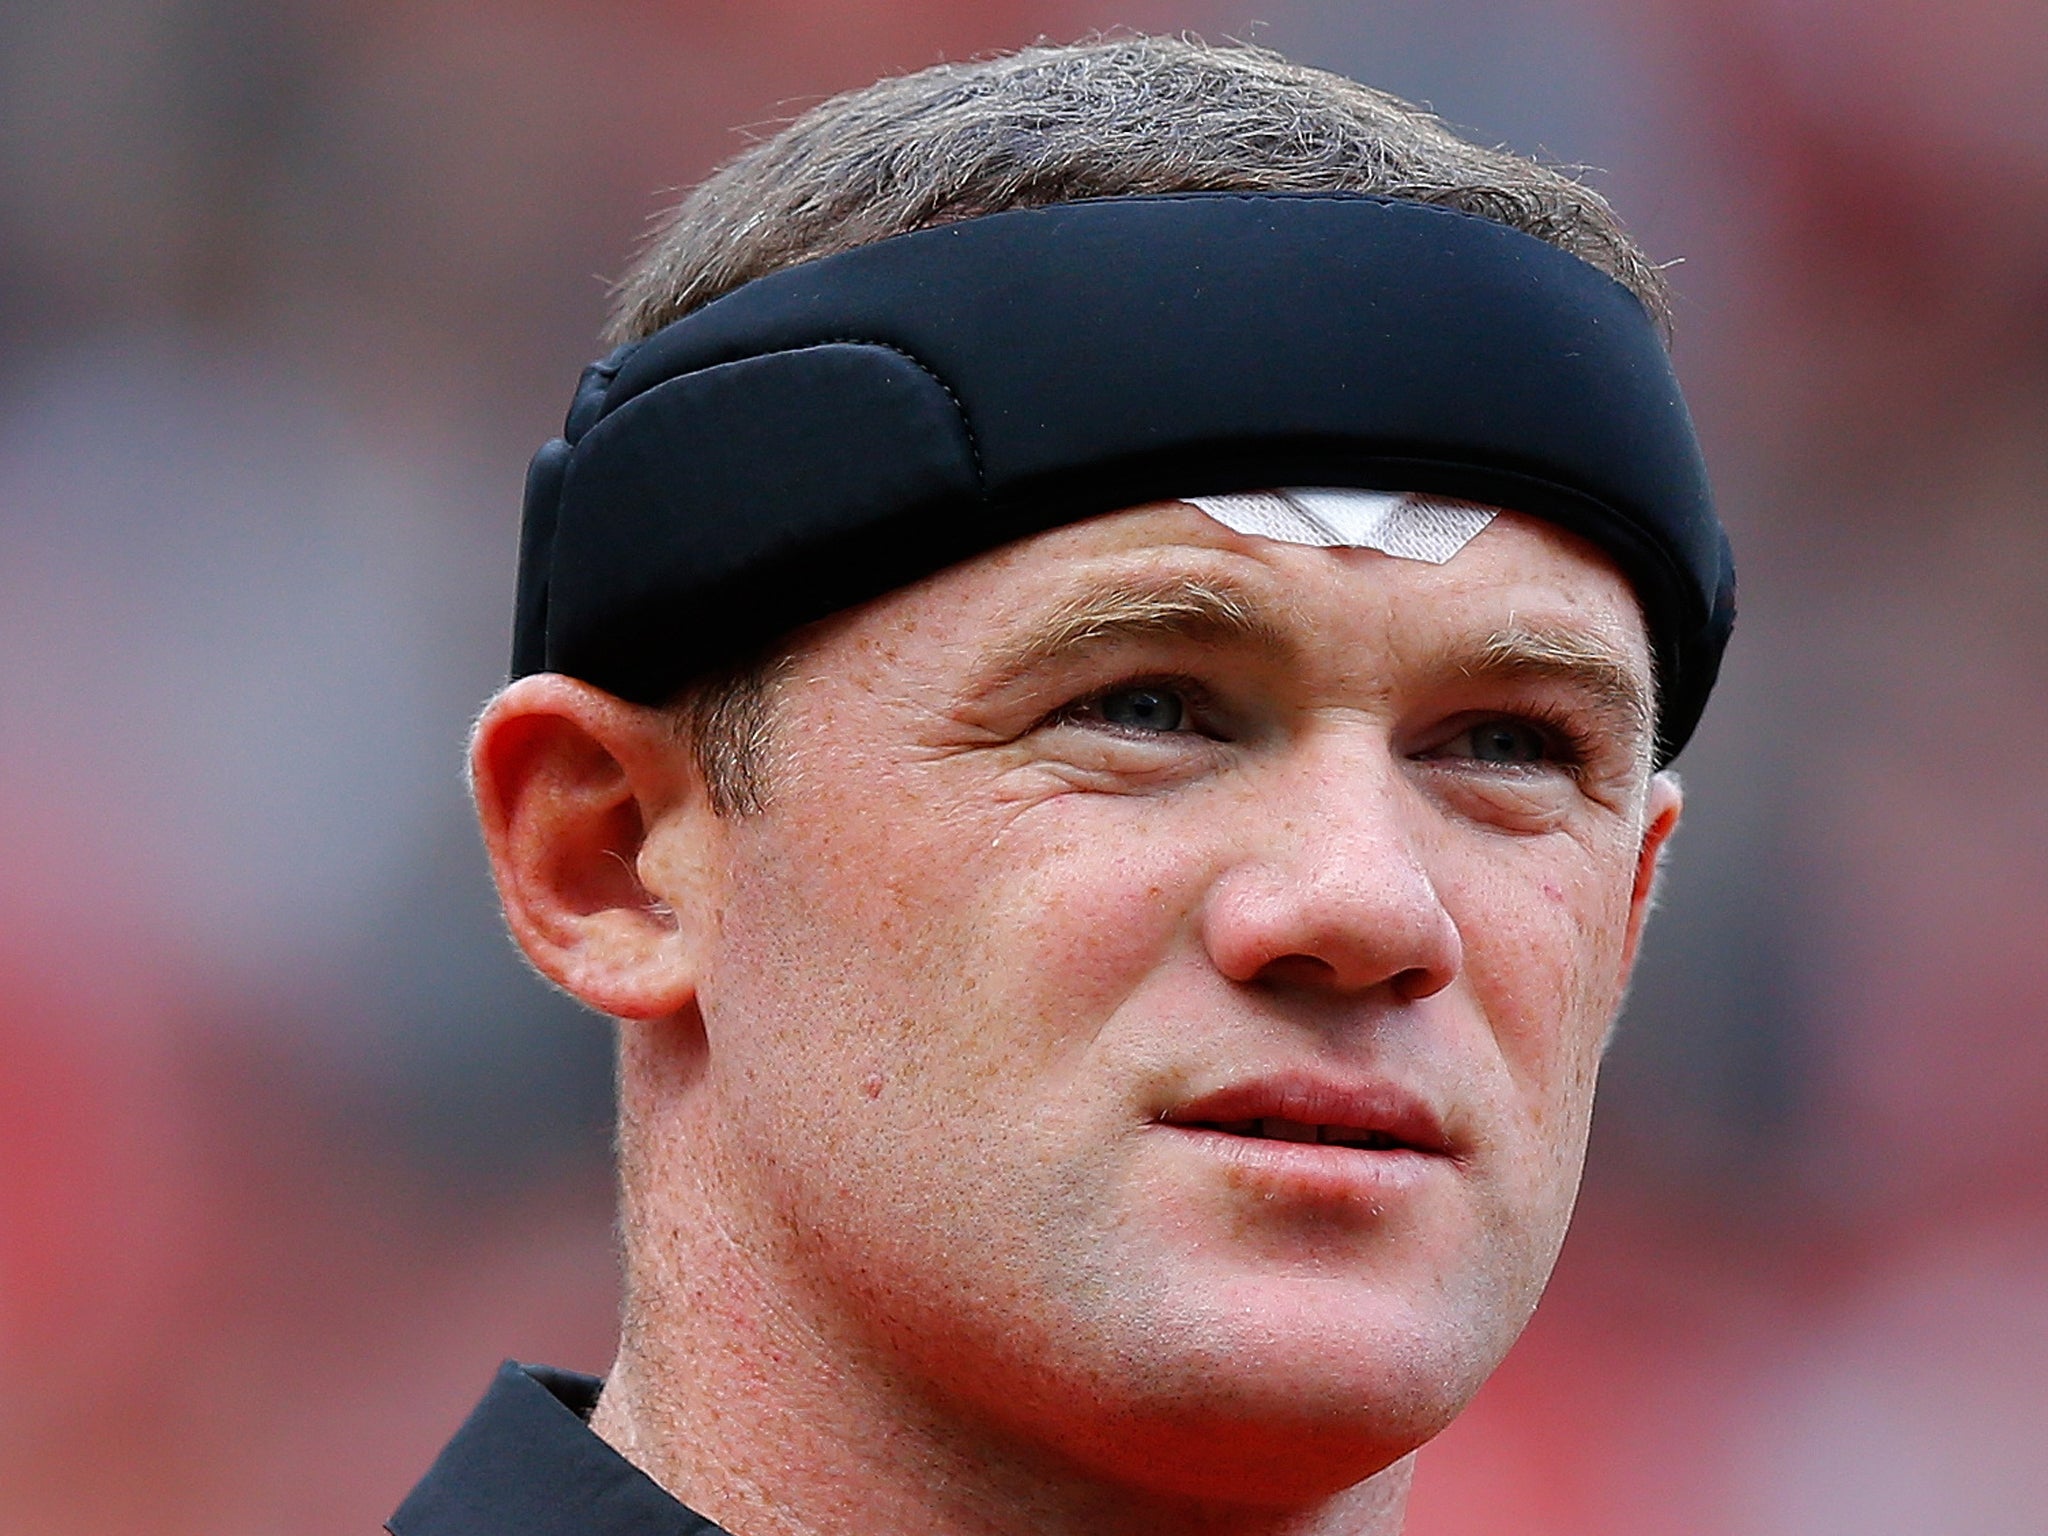 Rooney had his cut bandaged up and covered by a protective headband